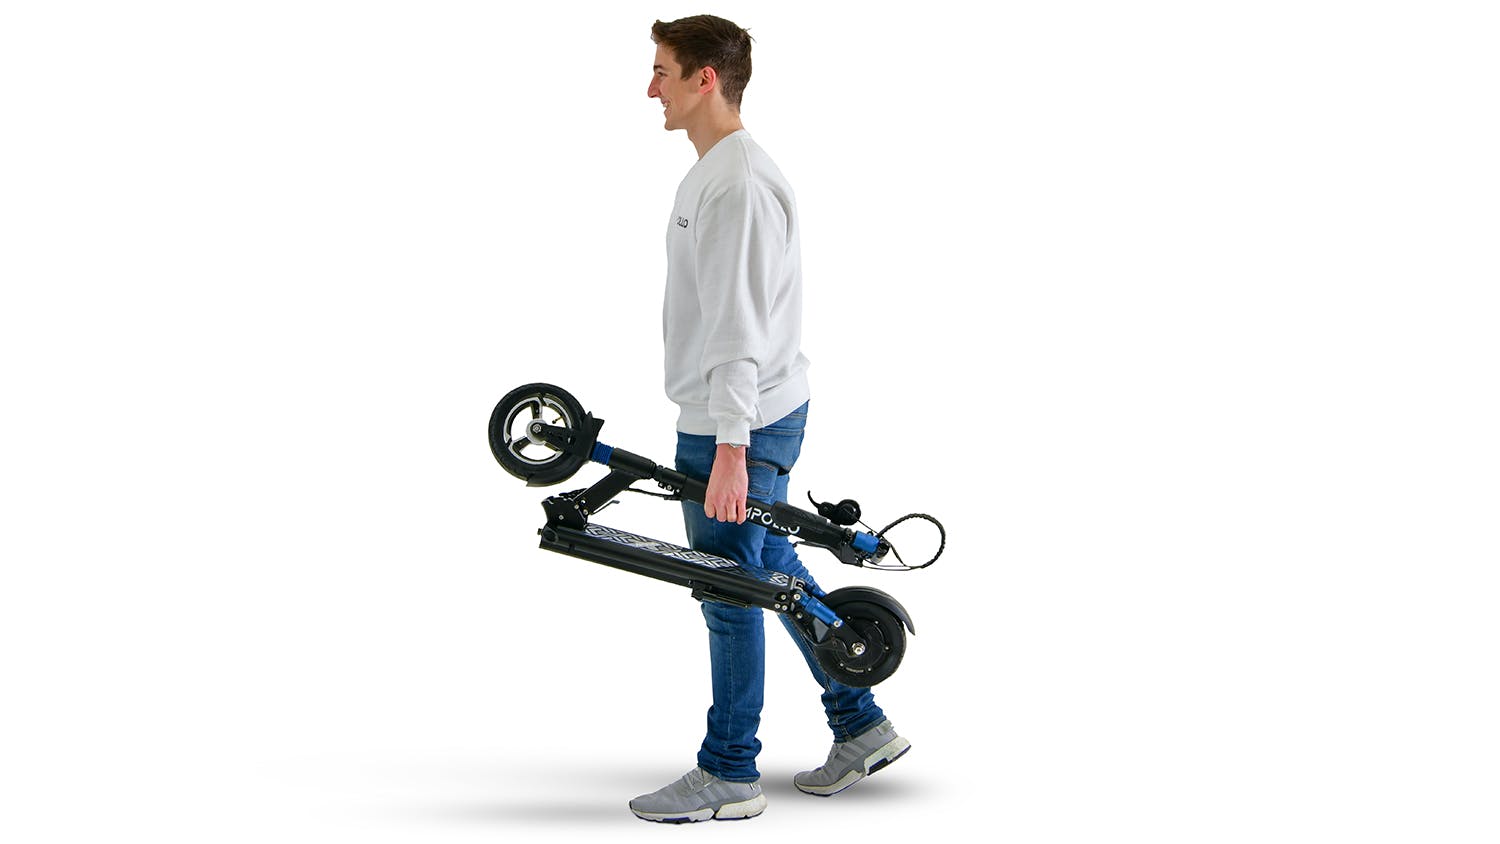 Apollo Light 350W Electric Scooter